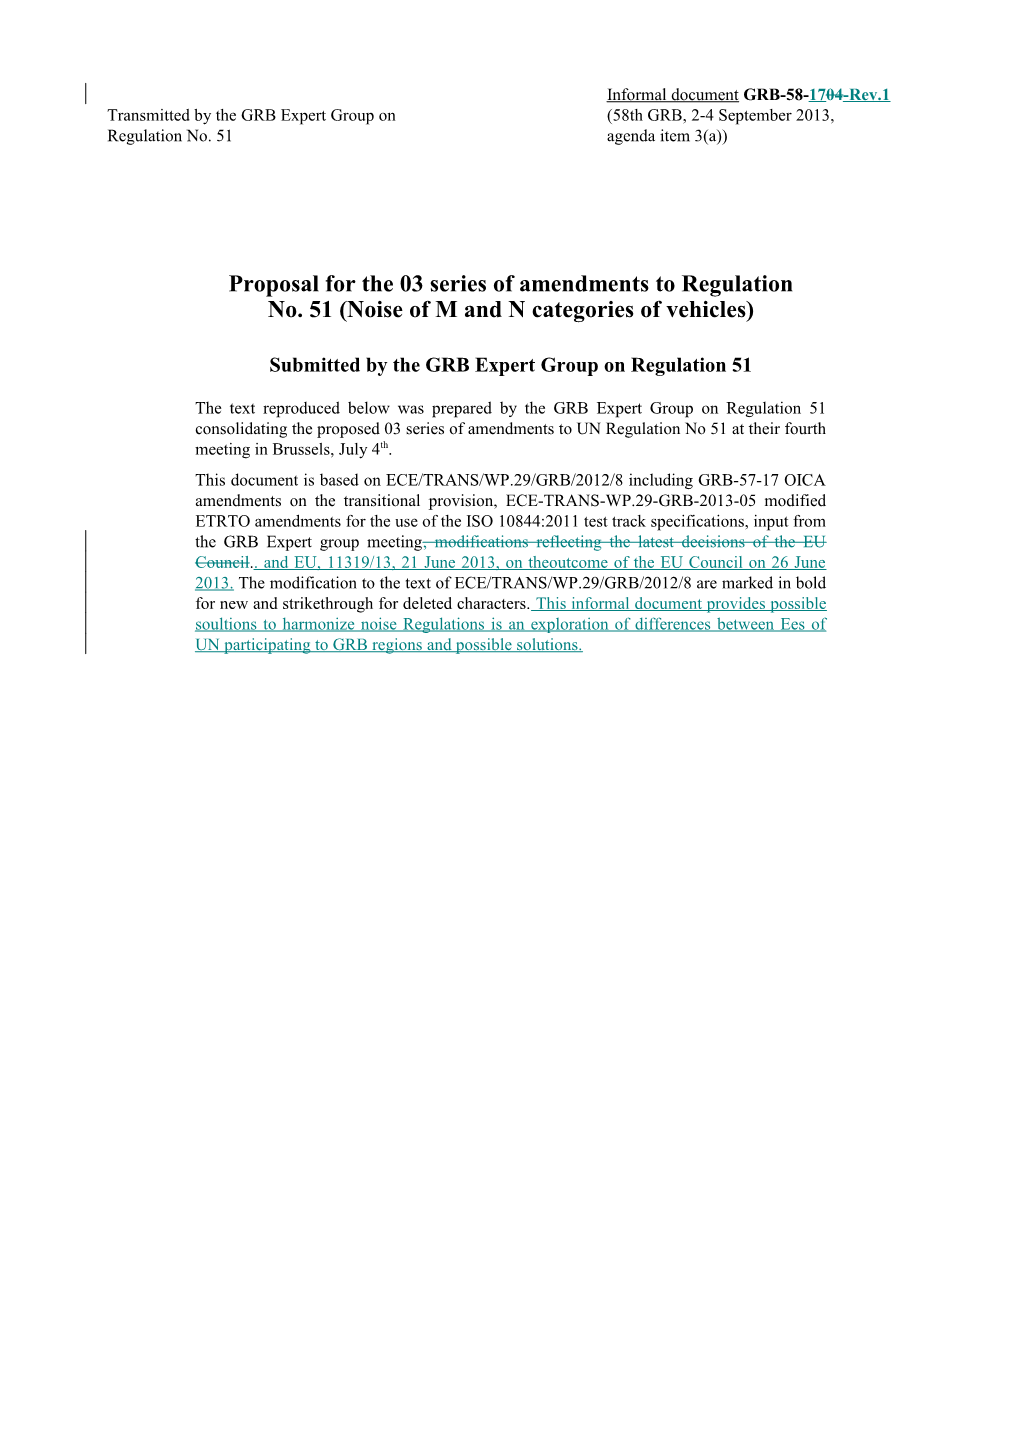 Proposal for the 03 Series of Amendments to Regulation No